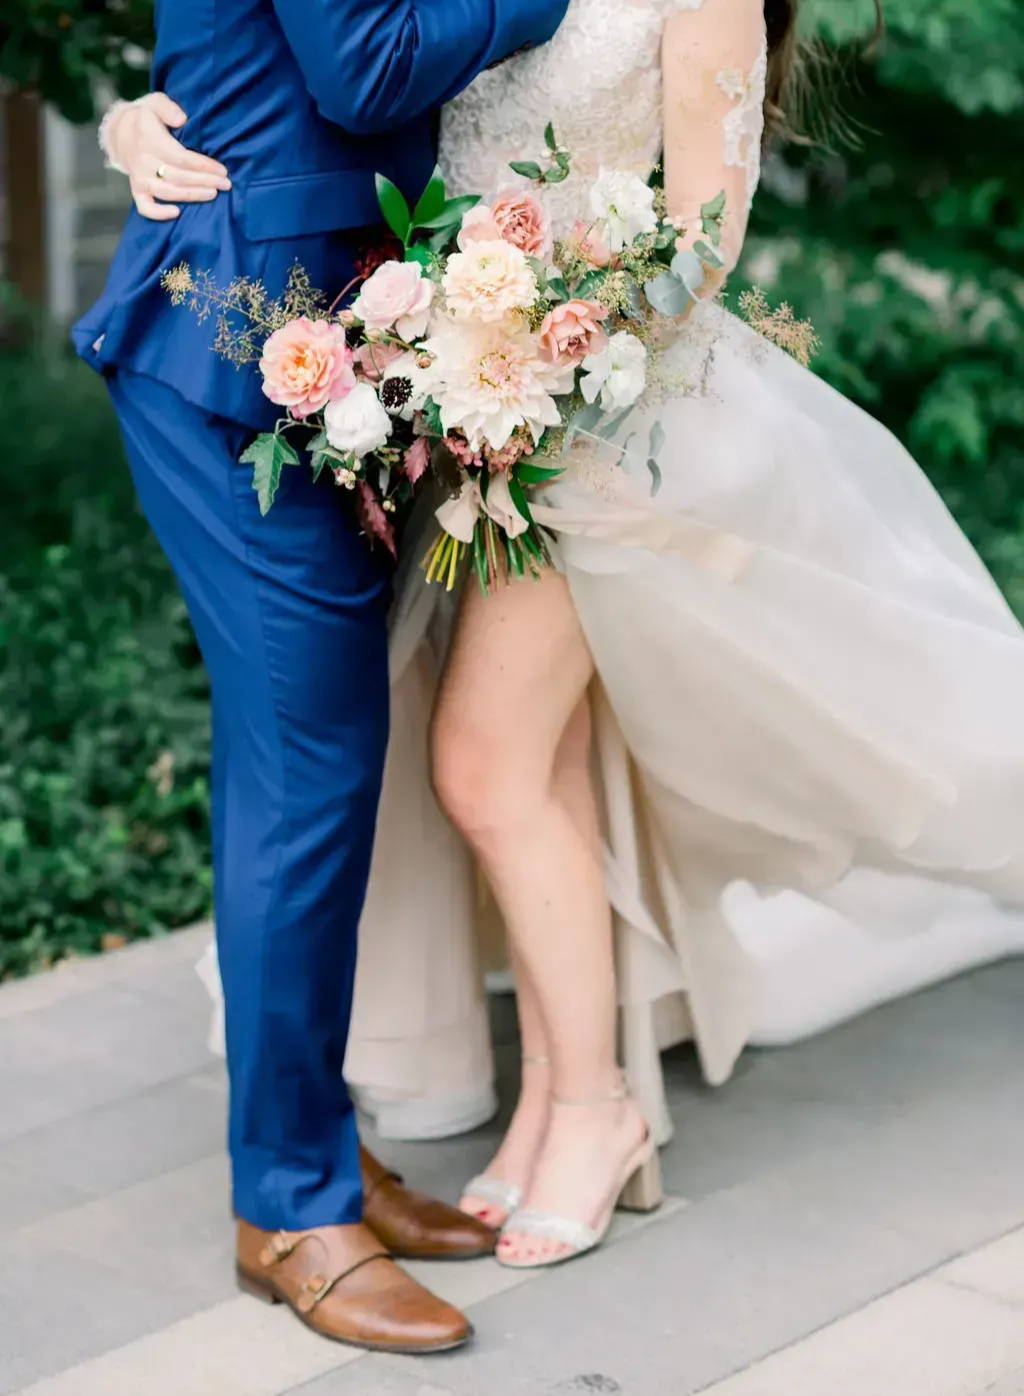 shoulder down picture of couple embracing while bride holds her pink and blush bridal bouquet in the front